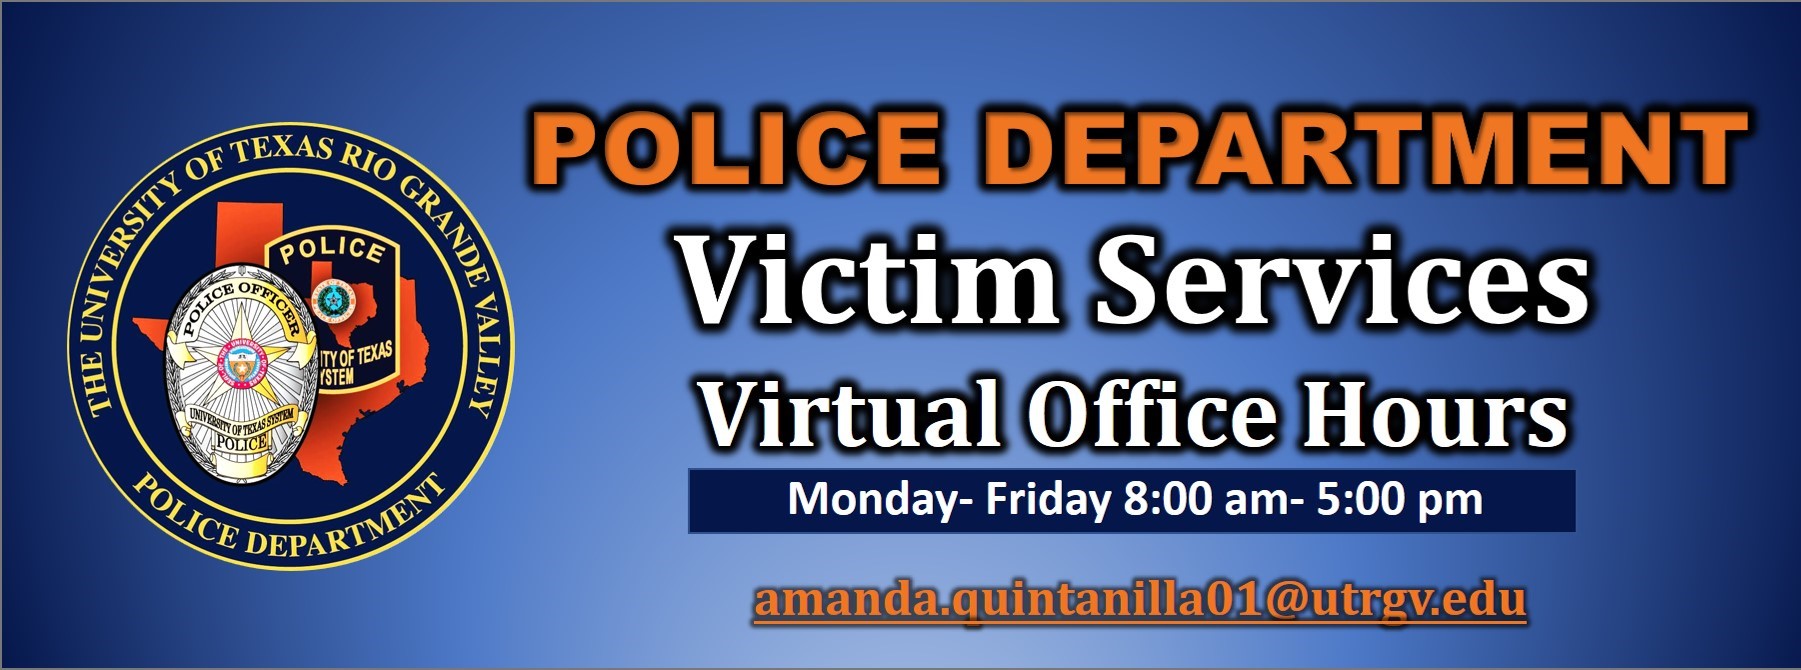 Police Department Victim Services Virtual Office Hours. Monday to Firday: 8:00 am to 5:00pm. Email amanda.quinanilla01@utrgv.edu for more information